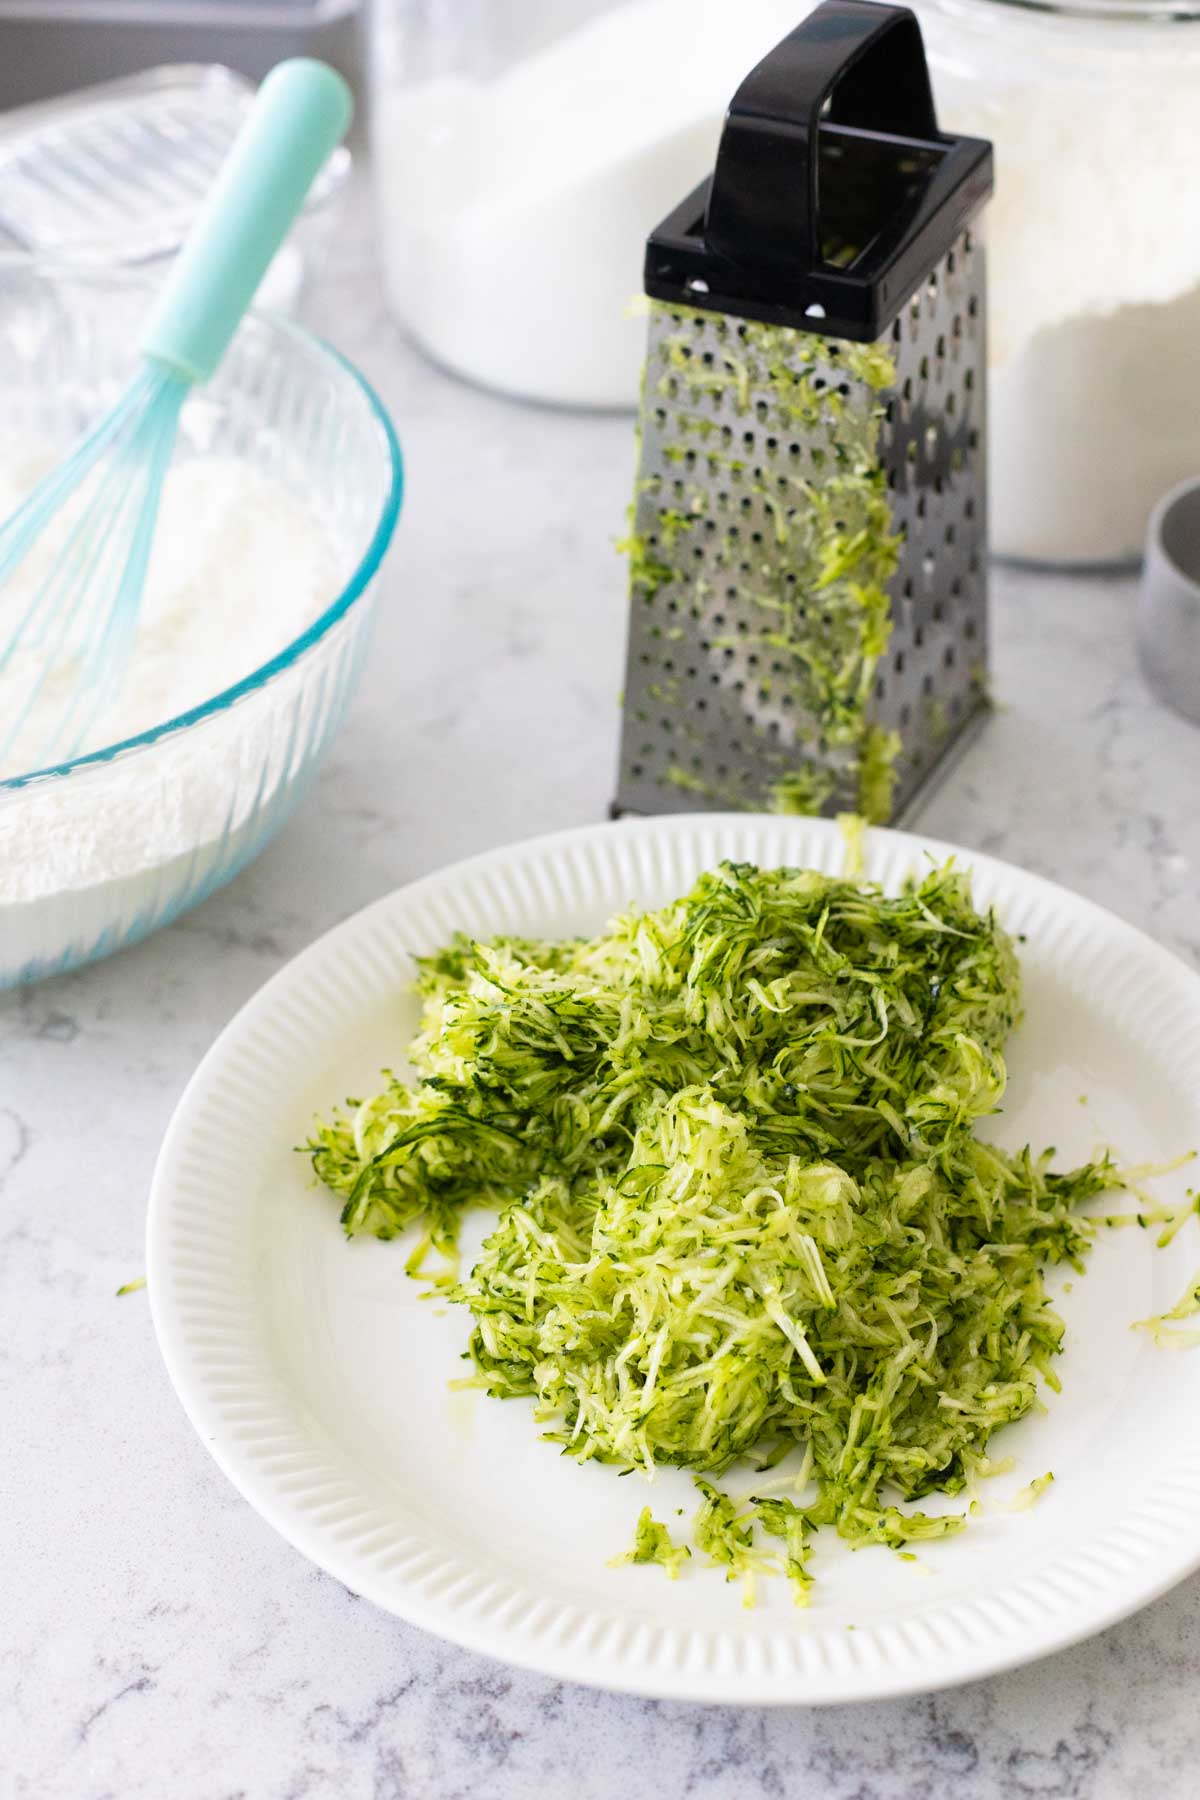 A white plate with grated zucchini has a box grater in the background.